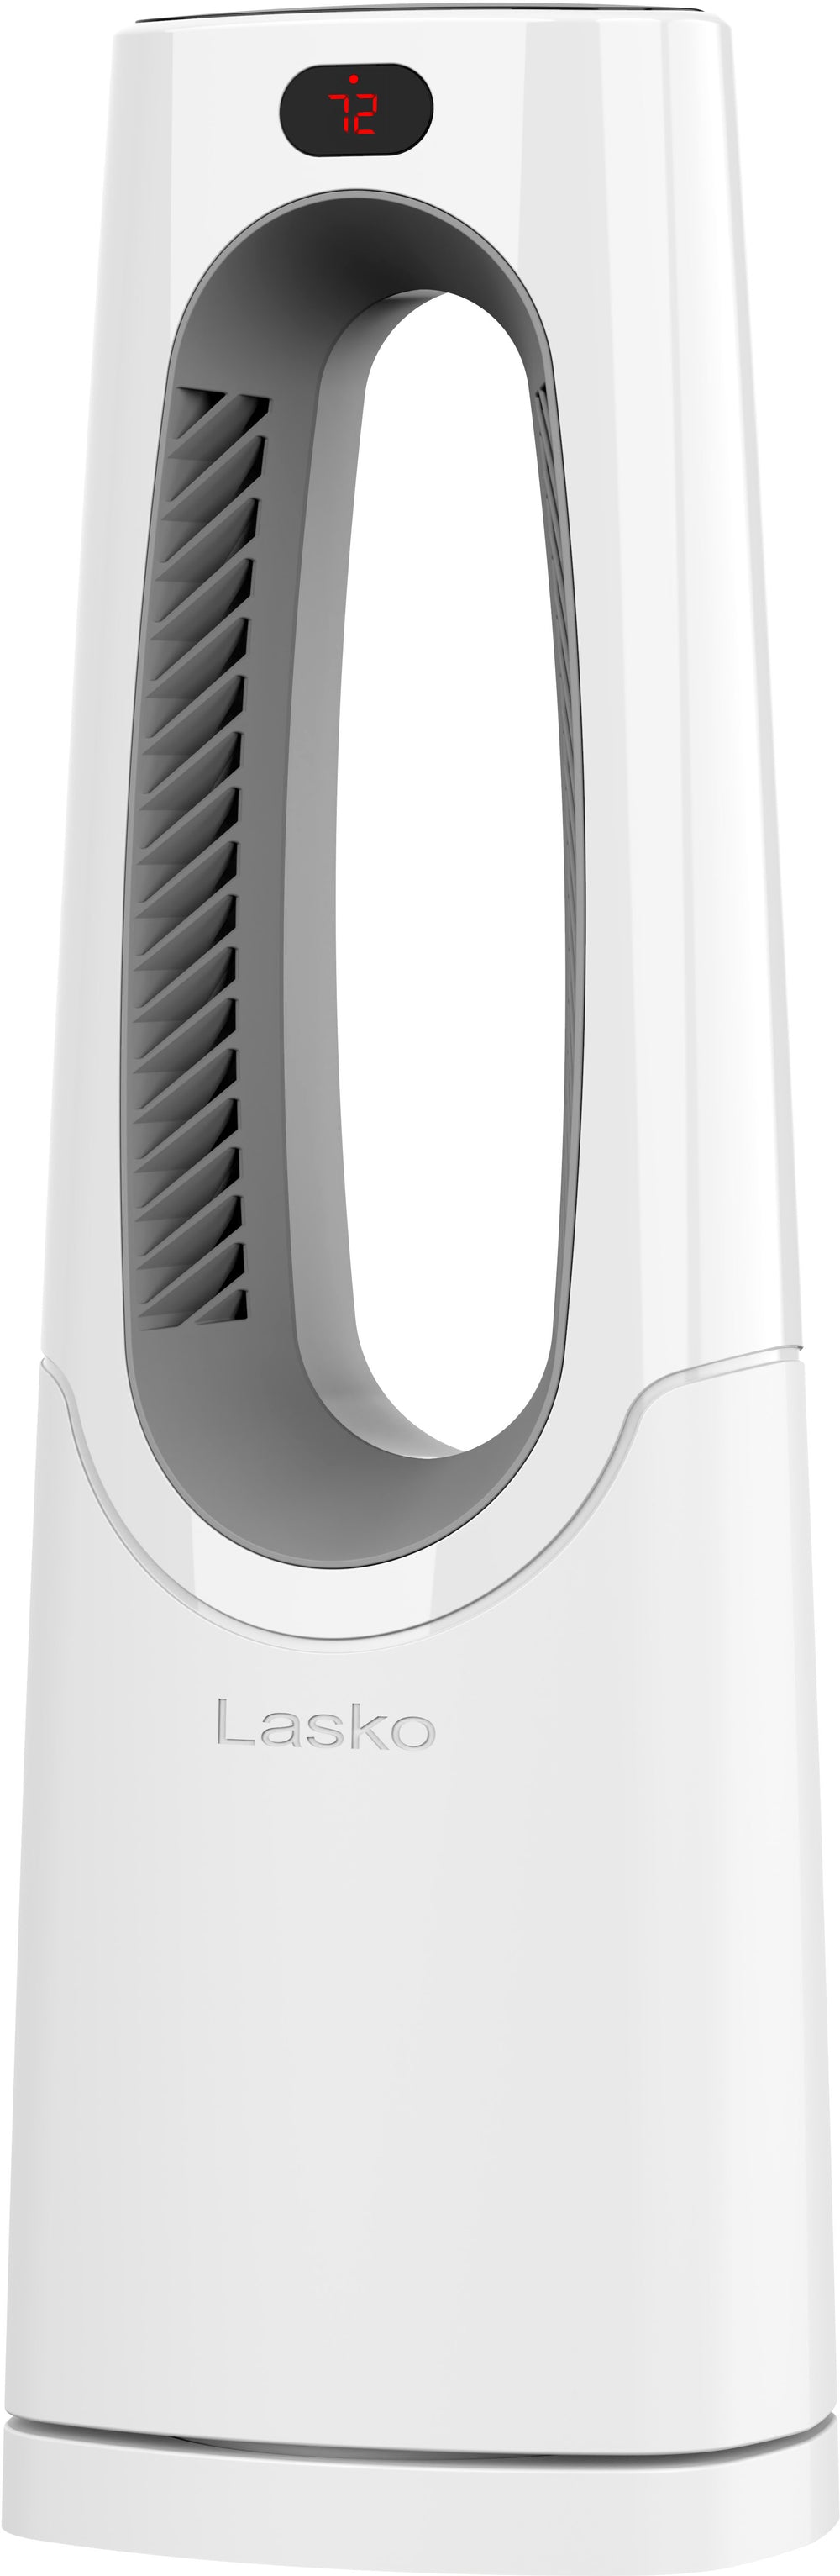 Lasko - 1500-Watt Bladeless Ceramic Tower Space Heater with Timer and Remote Control - White_1